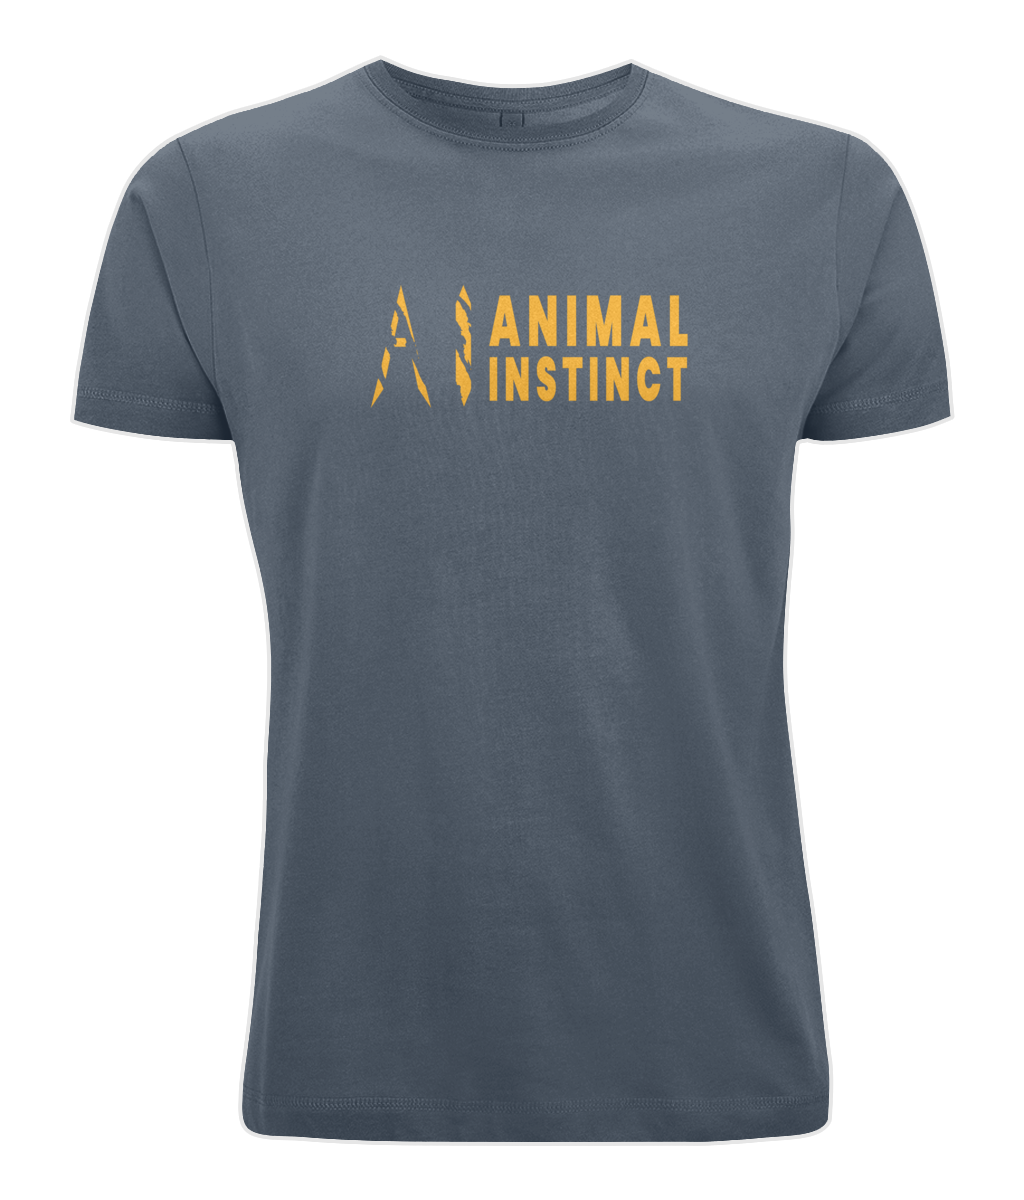 Mens grey Graphic Animal Instinct T-Shirt with Premium gold AI logo and Animal Instinct written in premium gold Across the middle of the chest